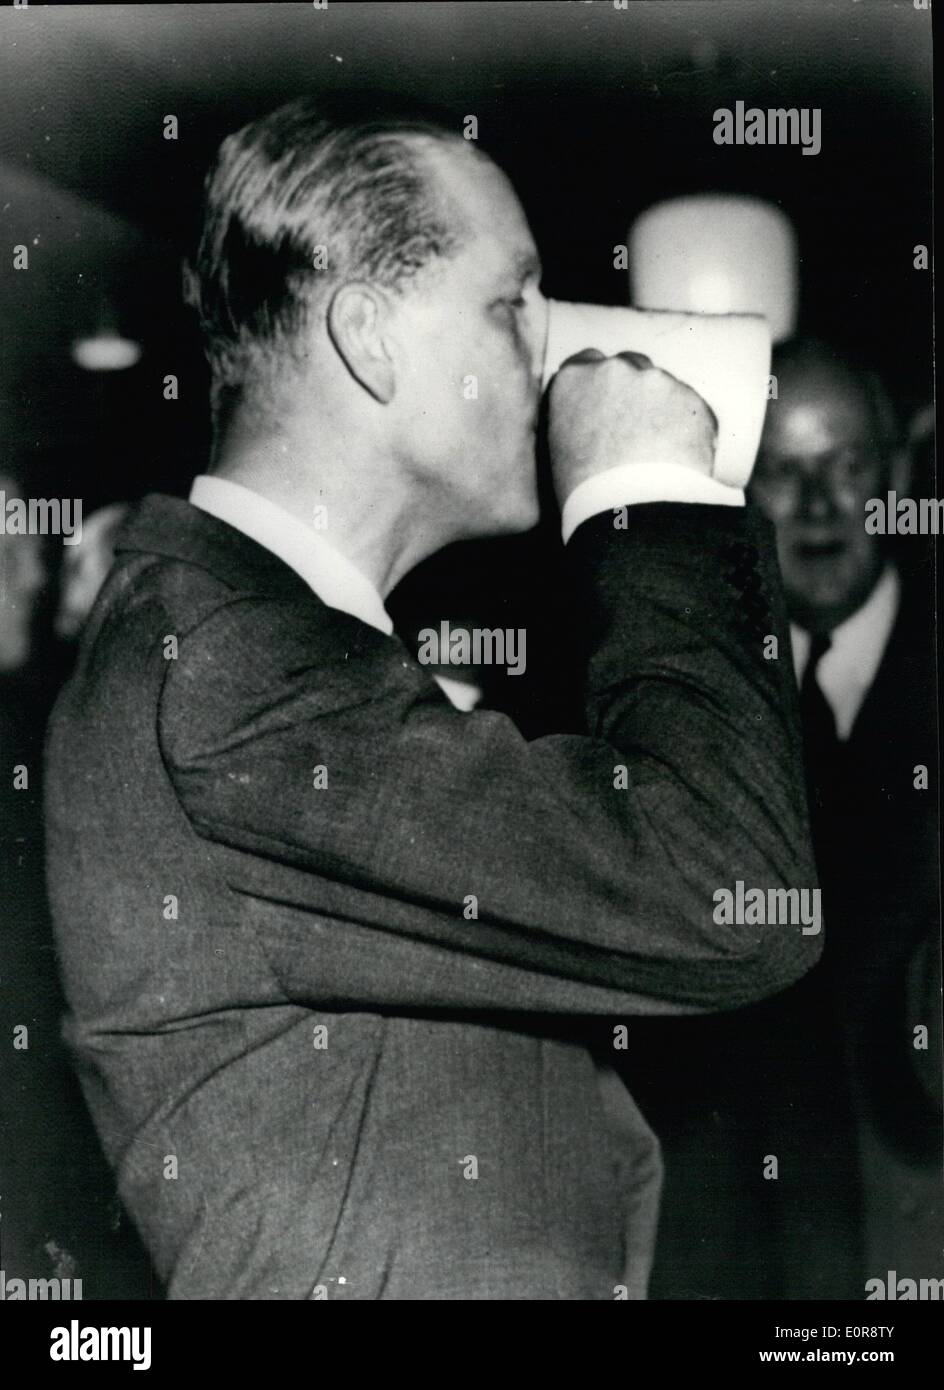 Jul. 07, 1958 - Royal Visit to Brussels fair.The Duke sinks a pint.: H.R.H. The Duke of Edinburgh pictured yesterday as he sinks a pint of bitter at the Britannia Inn - the typical English pub at the Brussels Fair - after he had made a tour of the British Pavilions. Stock Photo